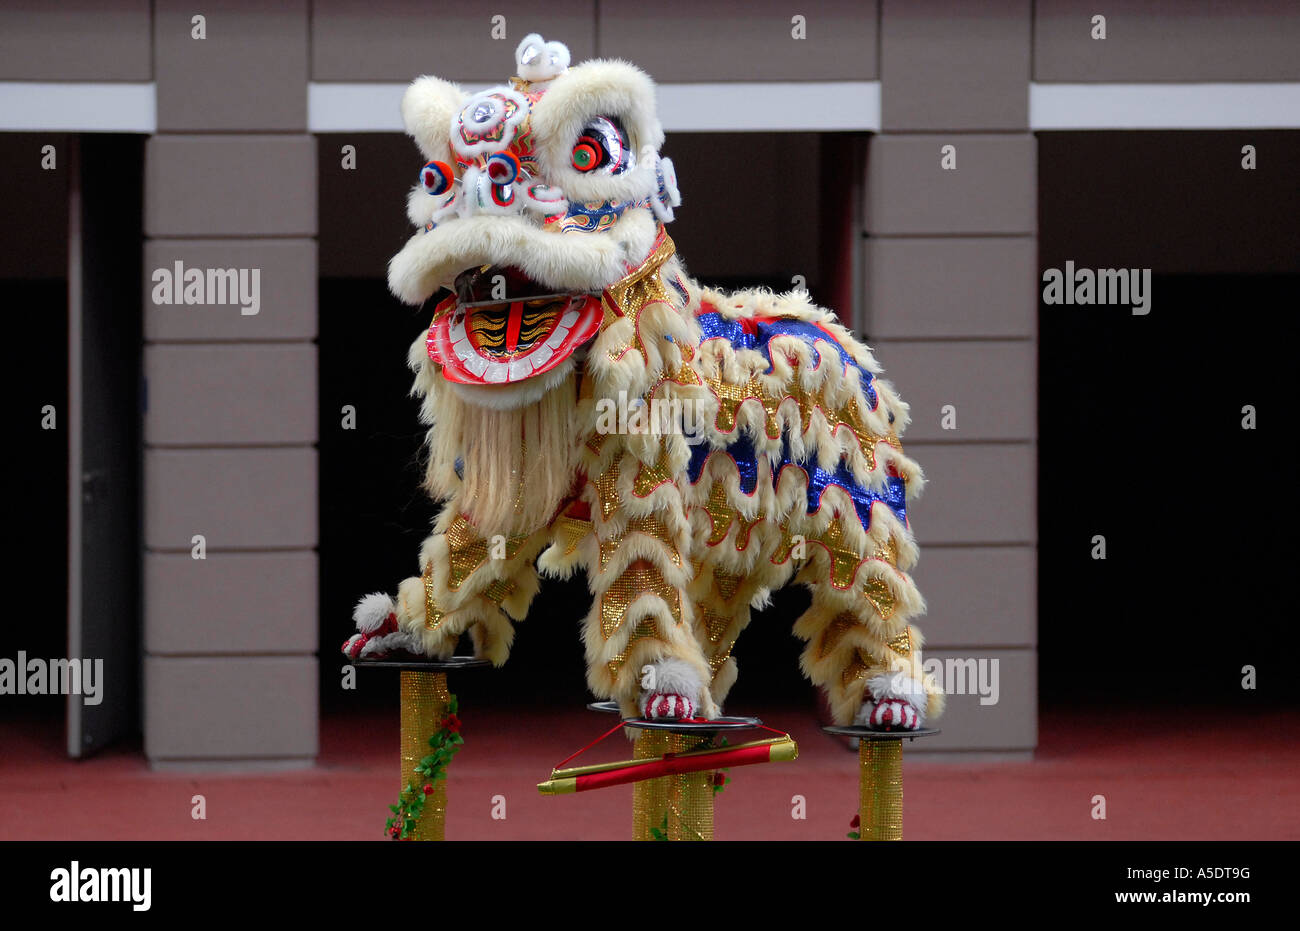 A man performing the traditional Lion dance during Chinese Lunar Year celebrations in which performers mimic a lion's movements in a lion costume Stock Photo